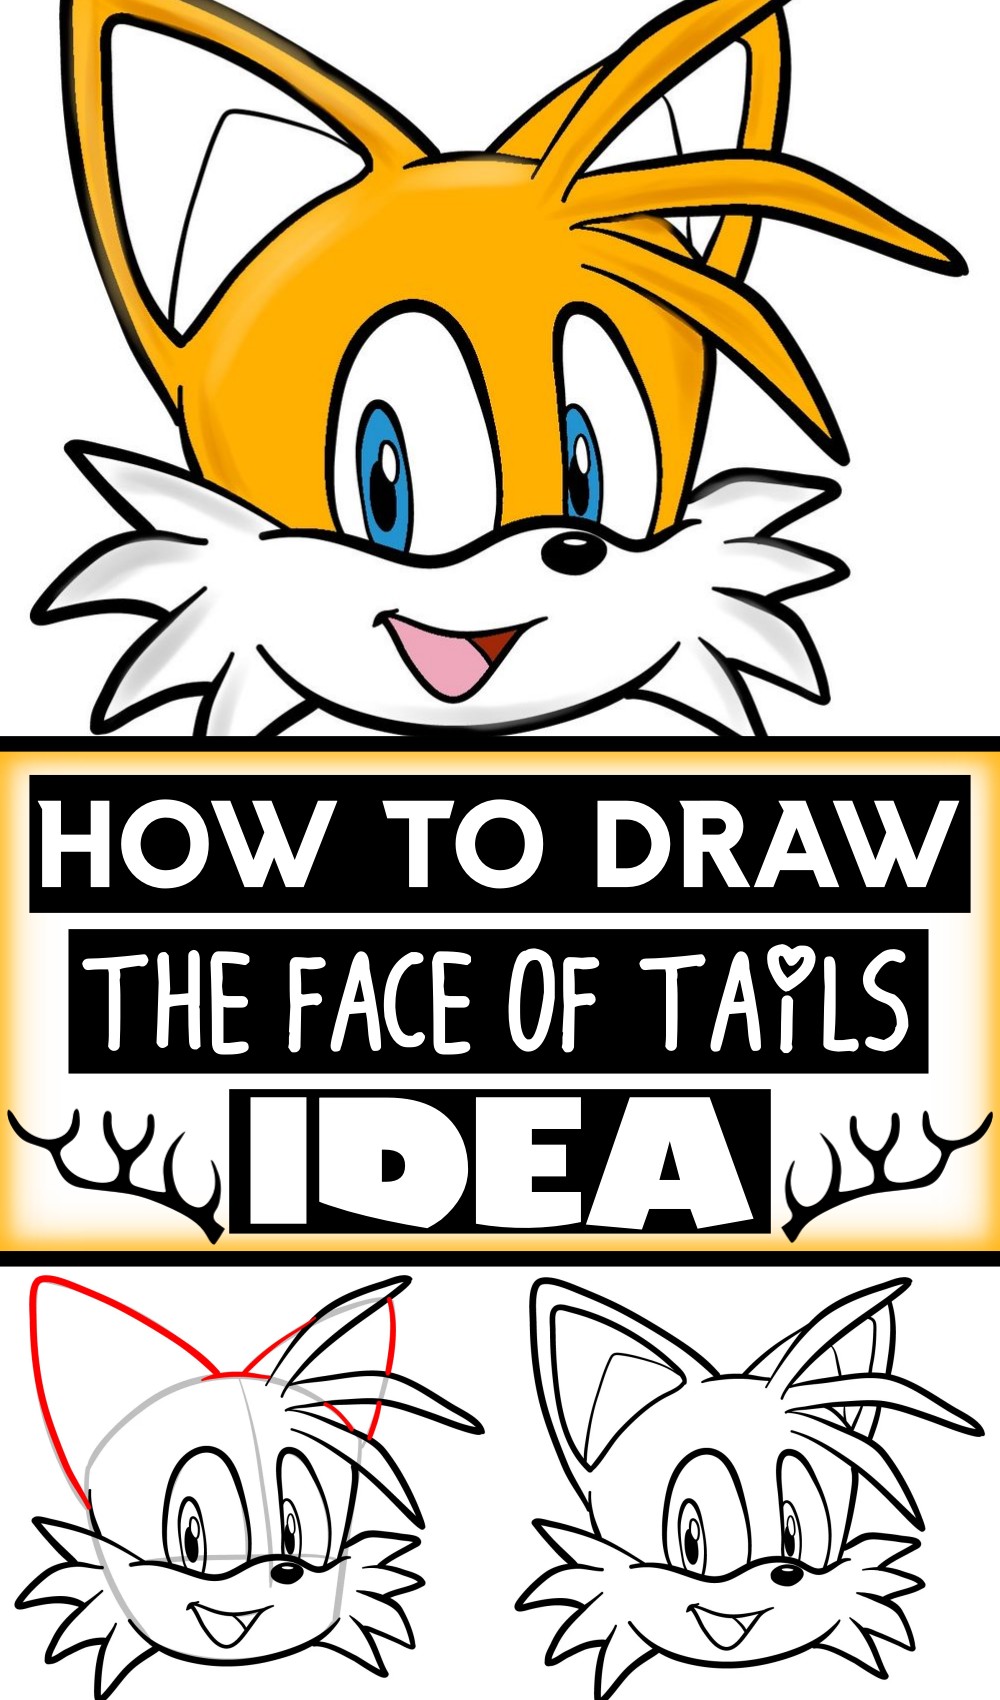 How To Draw The Face Of Tails